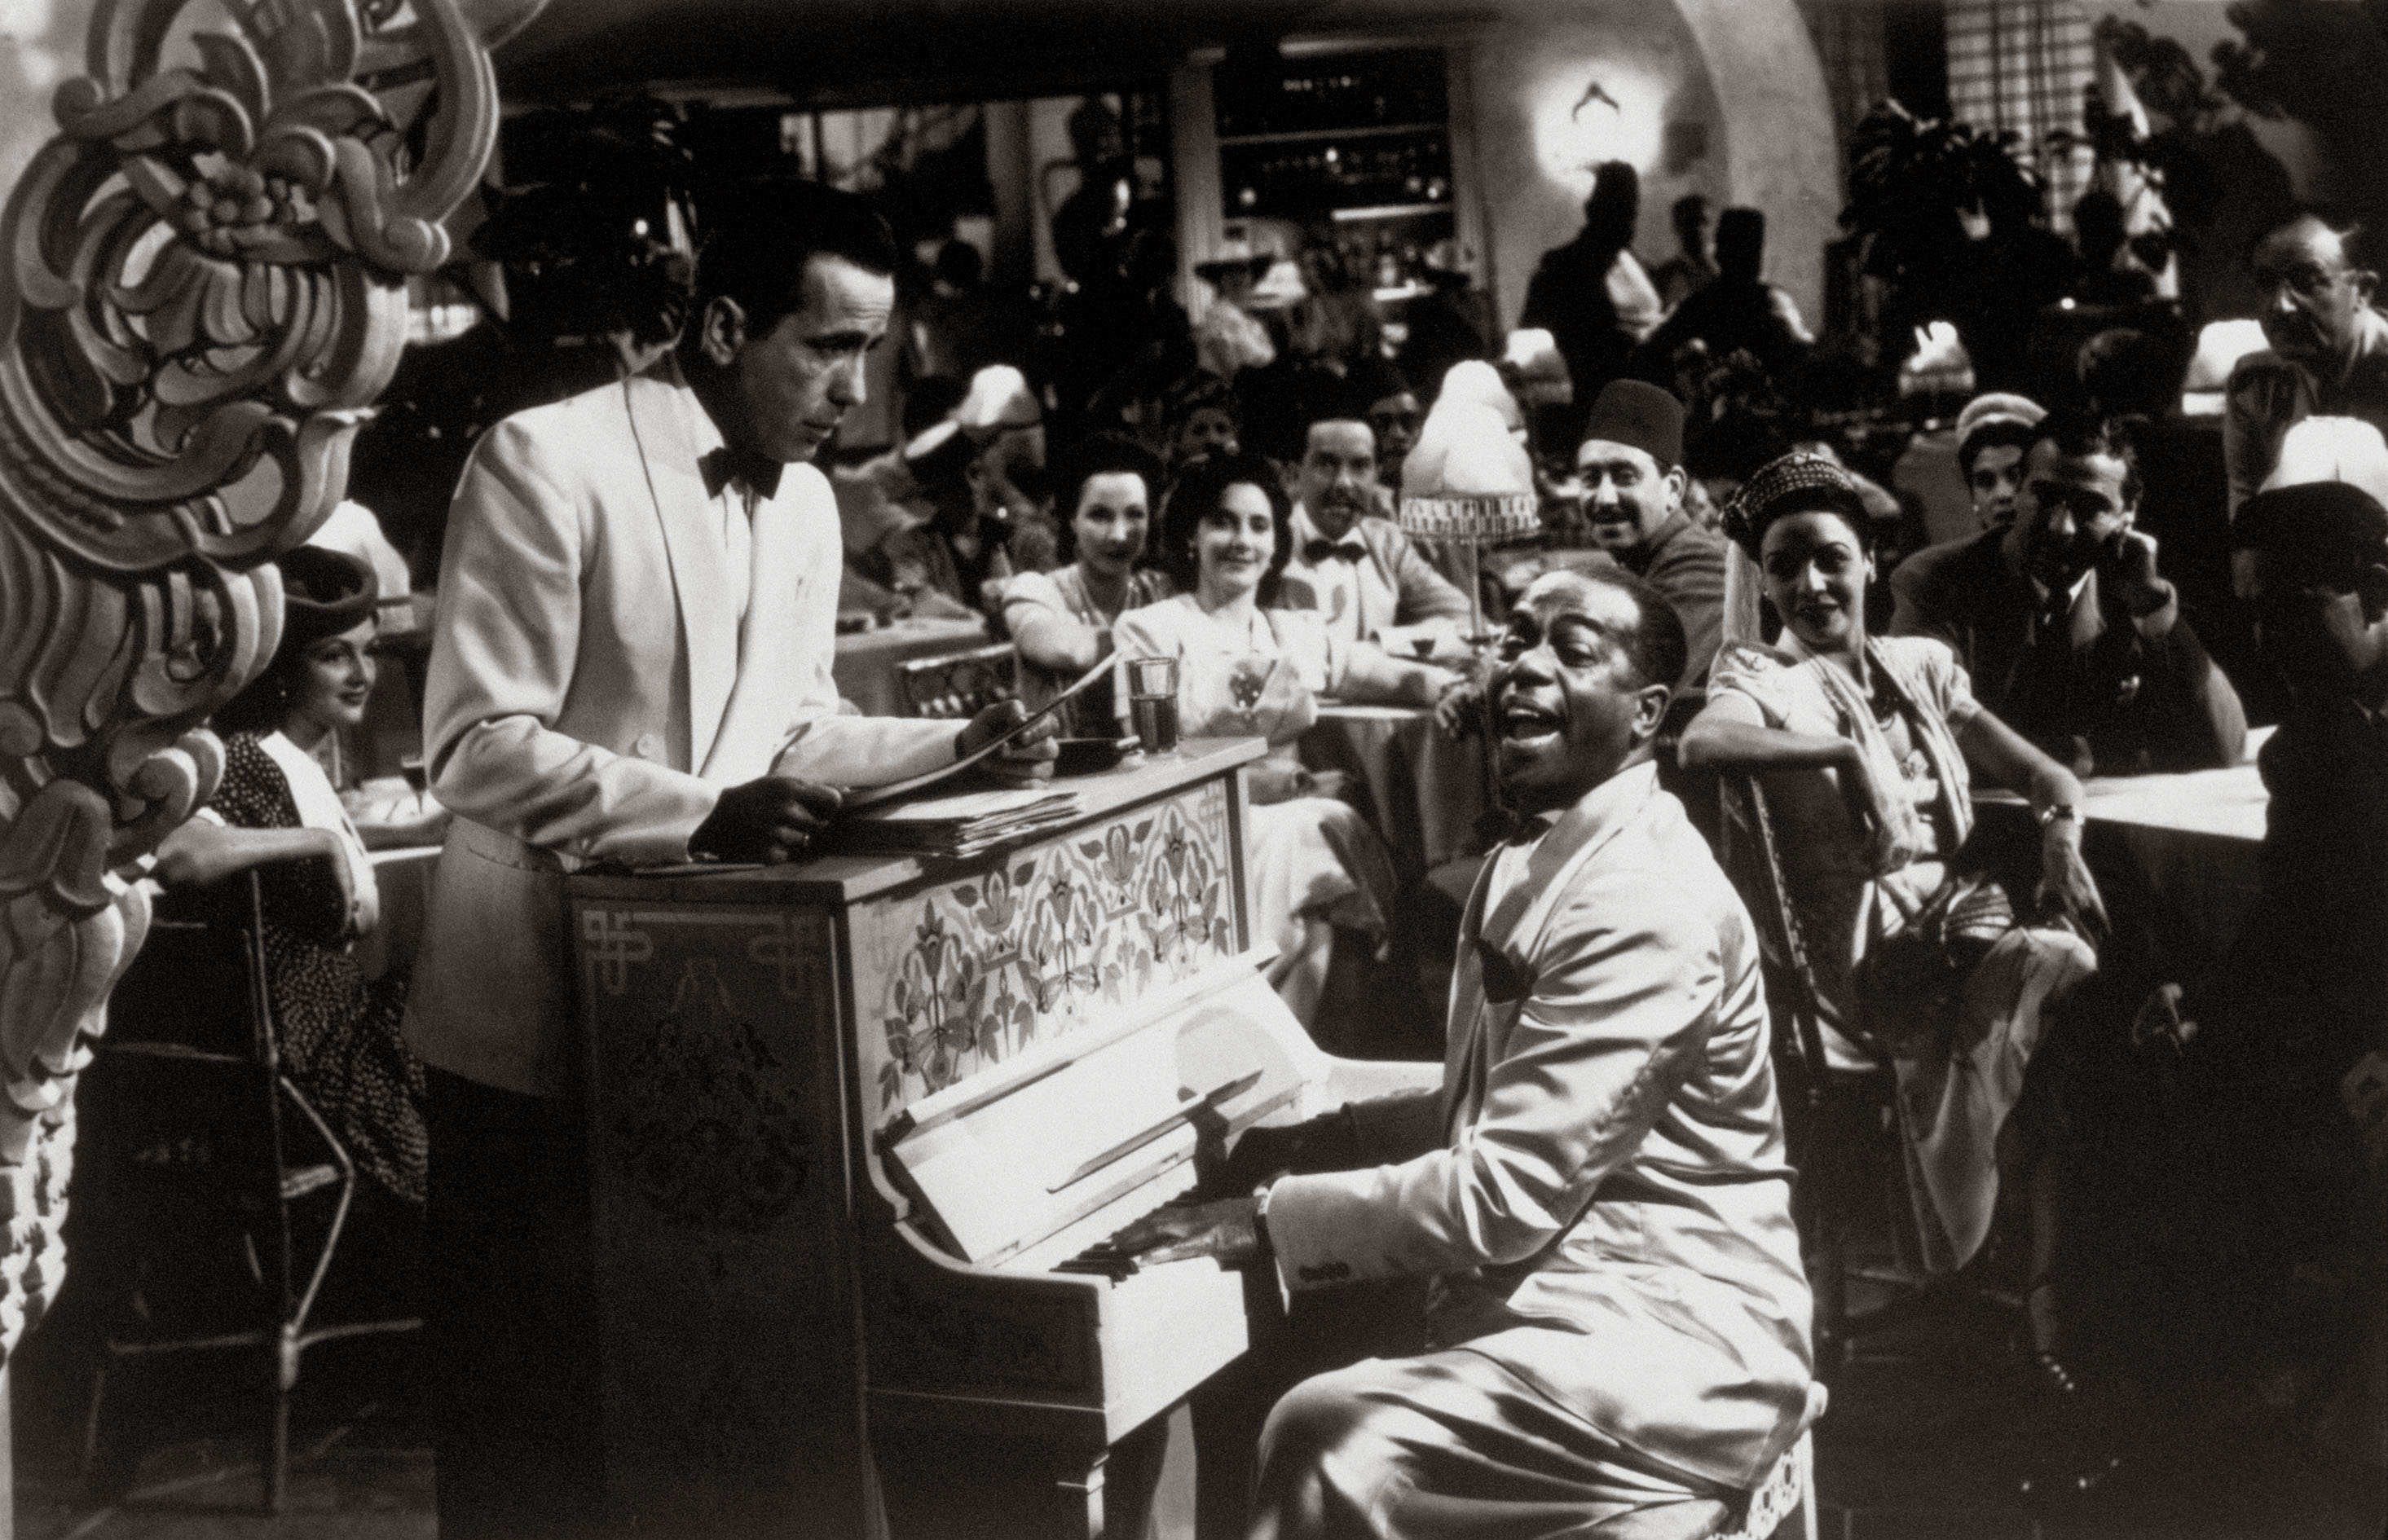 The piano shown in a scene from the 1942 film, Casablanca, starring Humphrey Bogart (left) and Dooley Wilson. Photo: Warner Bros